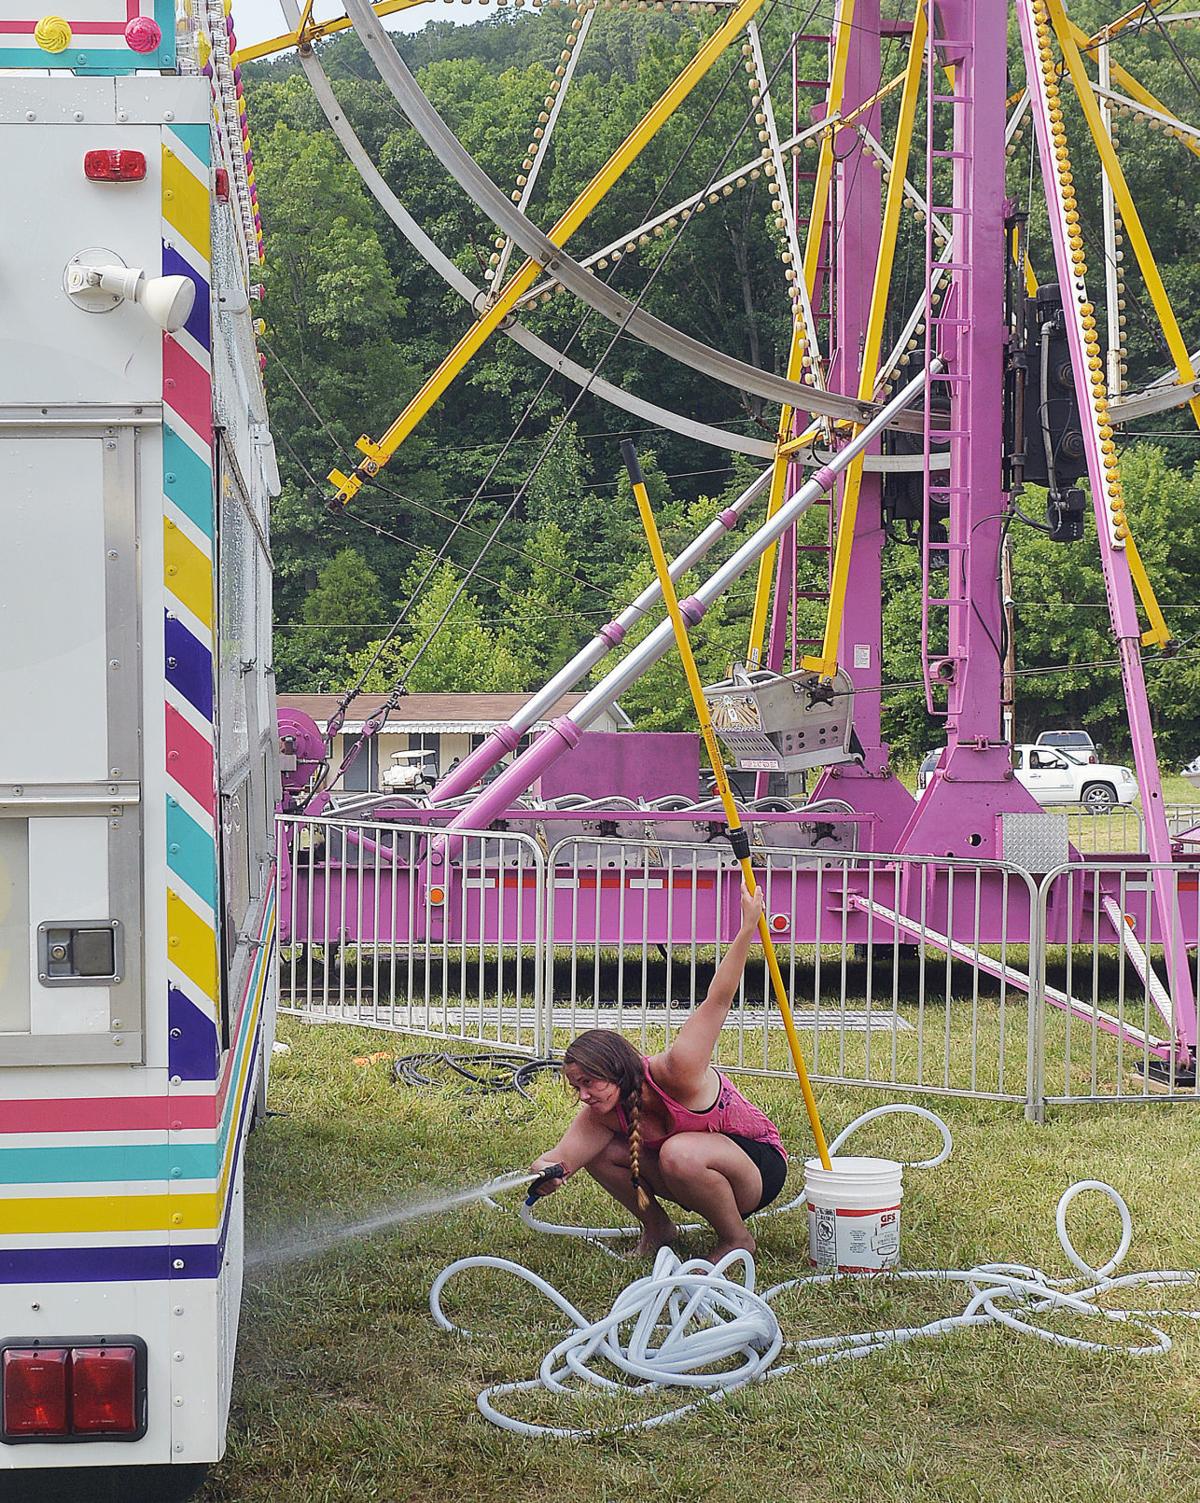 'Steeped in tradition,' Putnam County Fair returns Putnam County